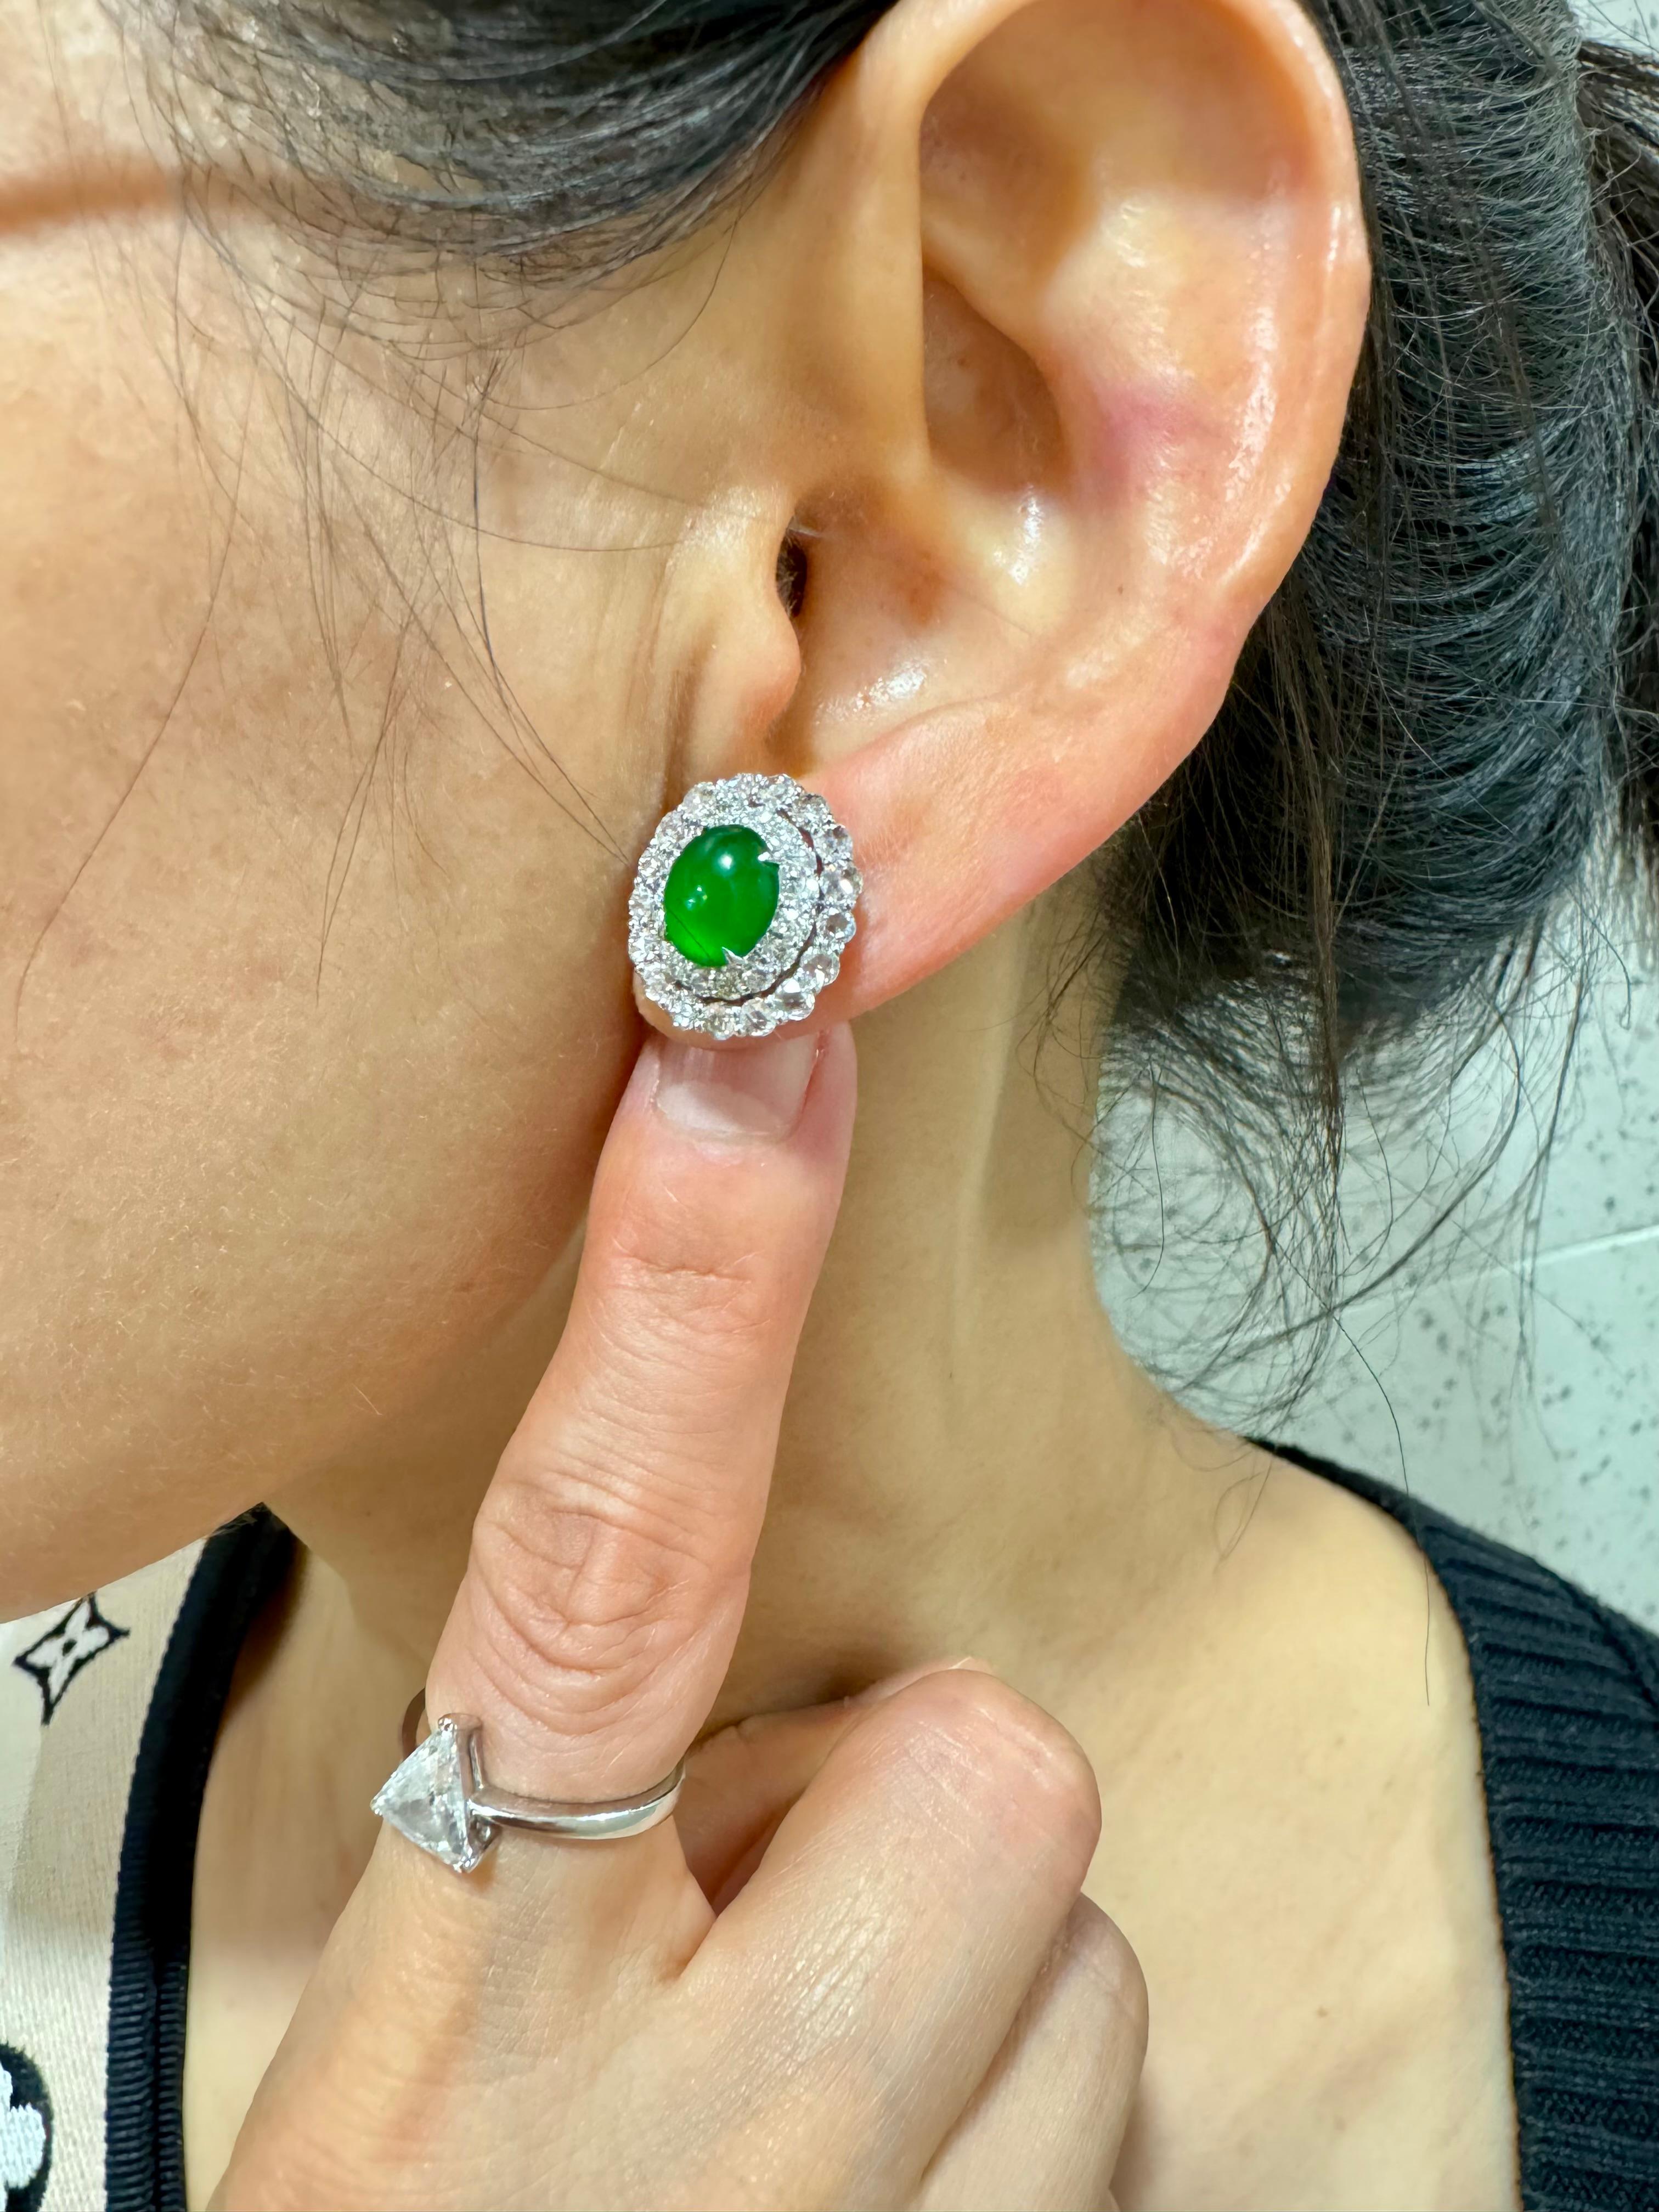 Please check out the HD video! It doesn't get much better than this! Here is a nice pair of true imperial green Jadeite Jade earrings. It has the best of the best glowing green color. The earrings are about 16x14.6mm each in outer diameter. The jade